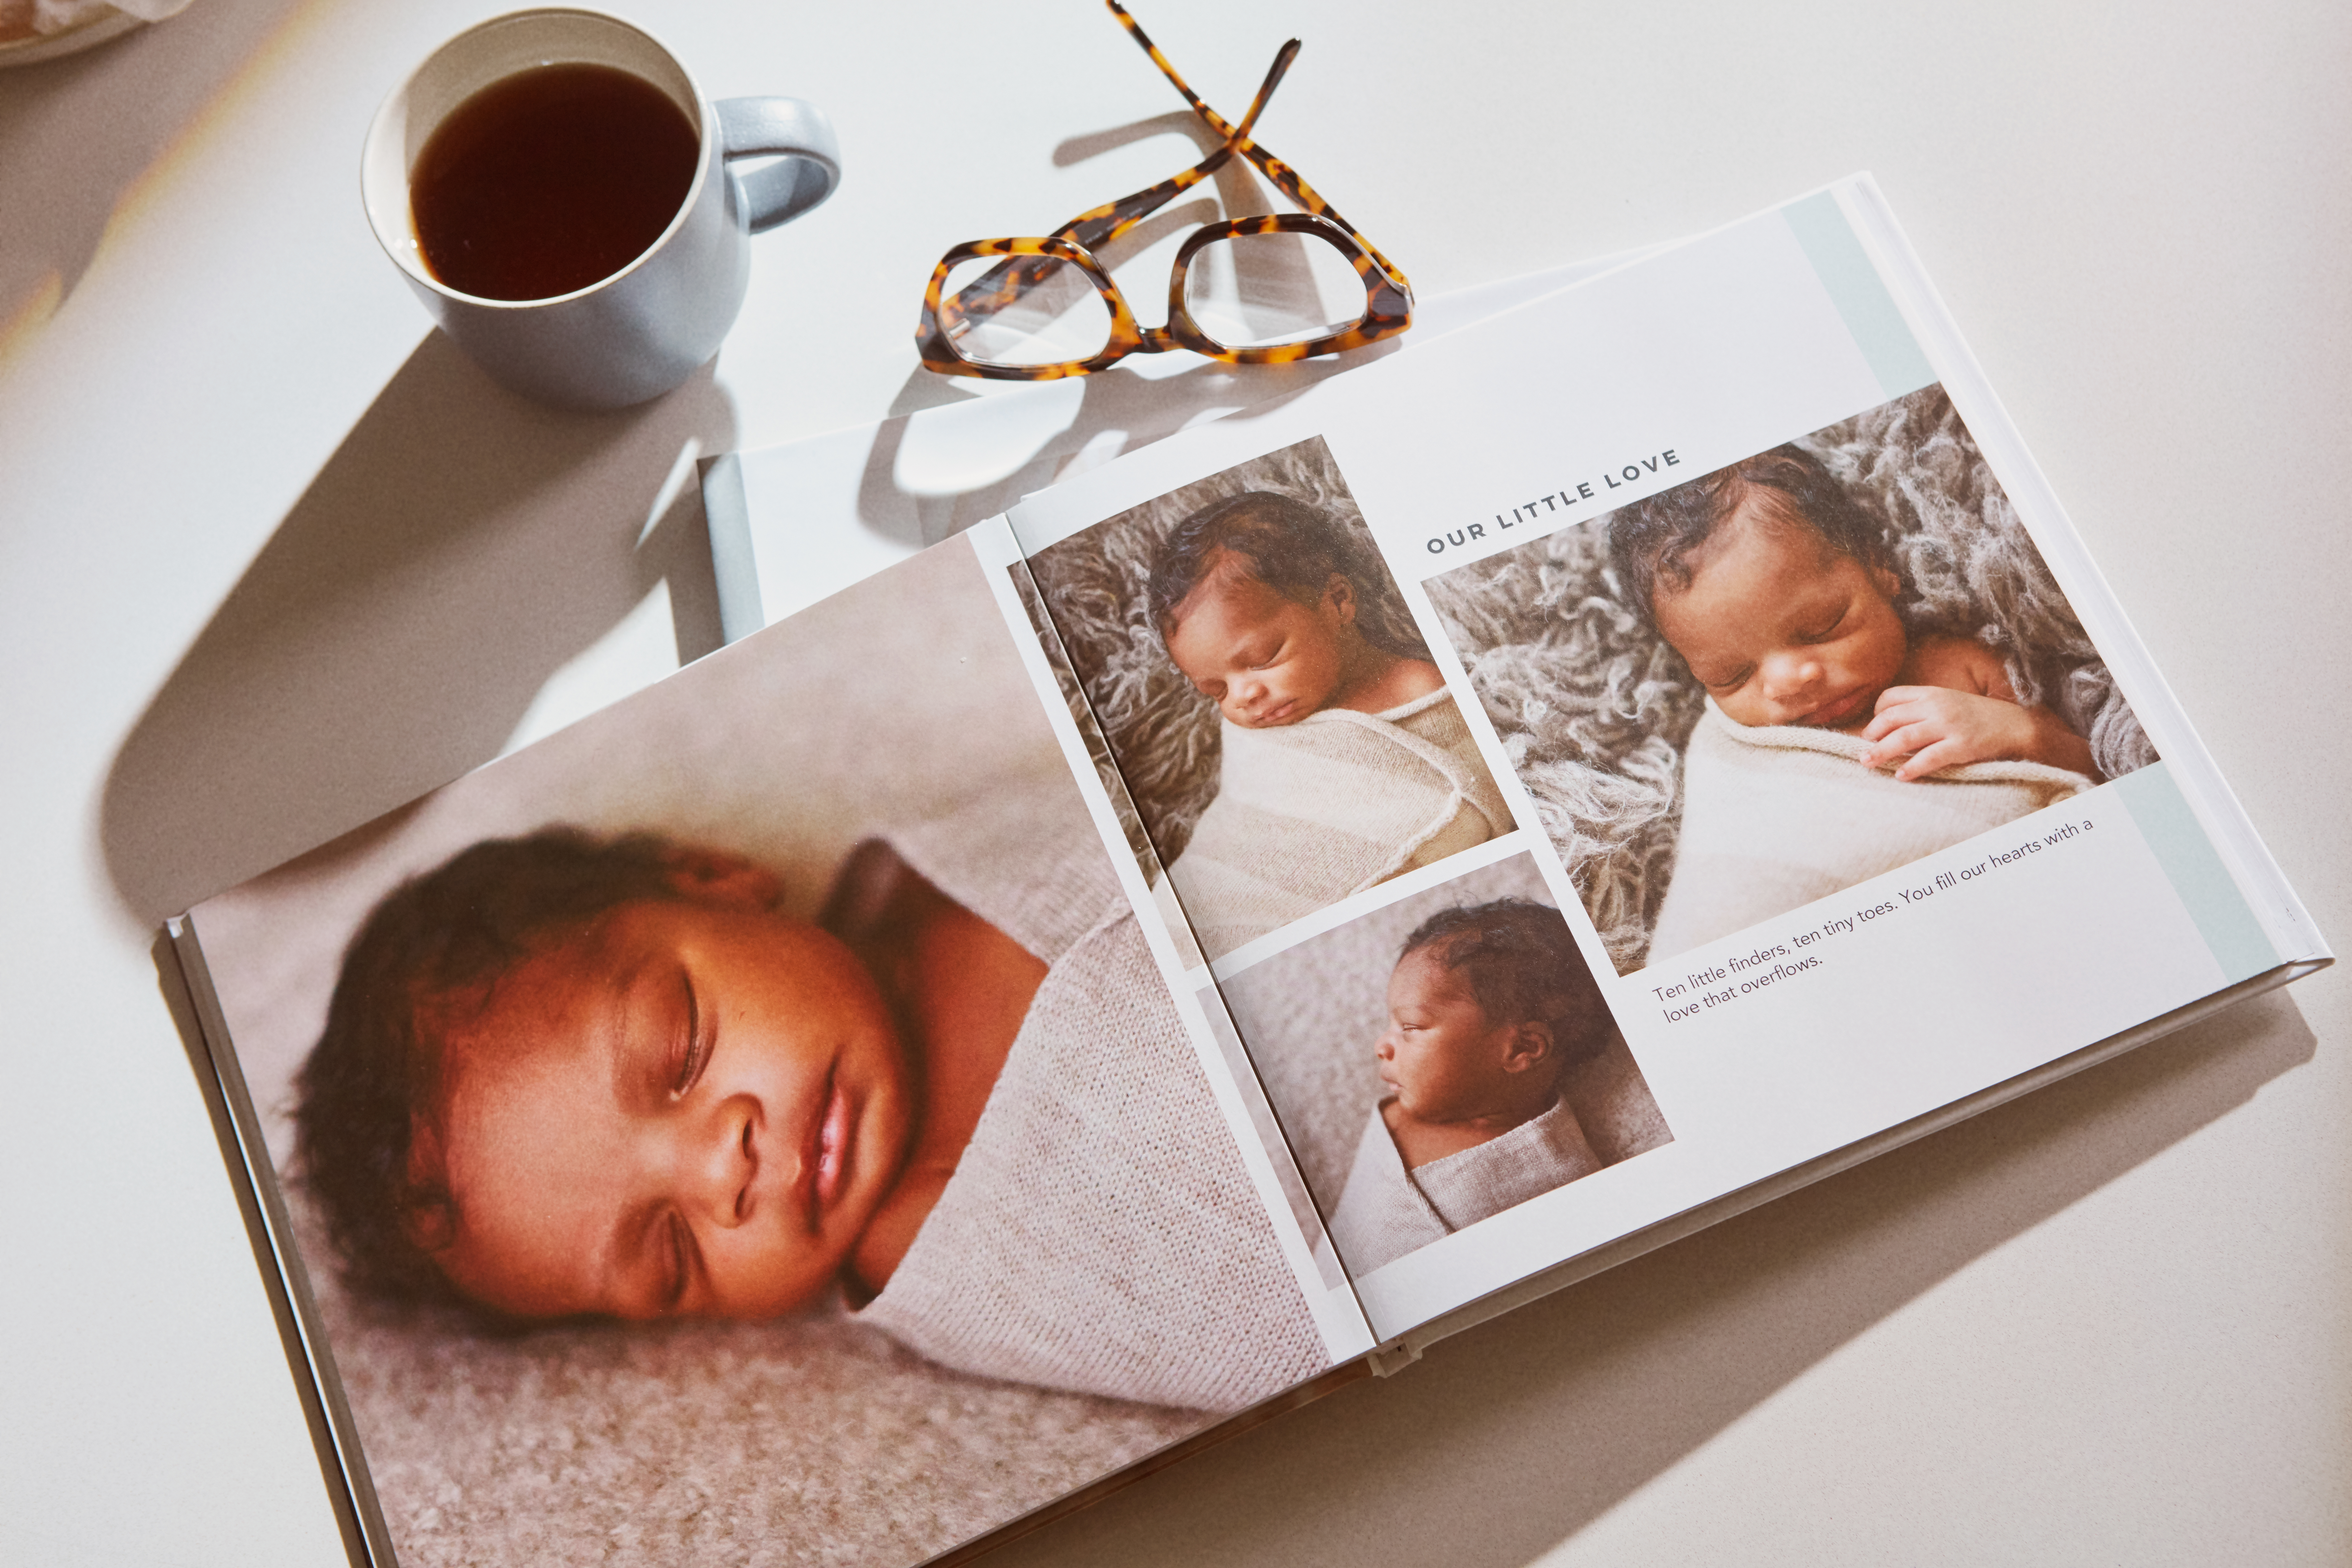 A baby photo book with a collage of baby photos next to glasses and a cup of coffee